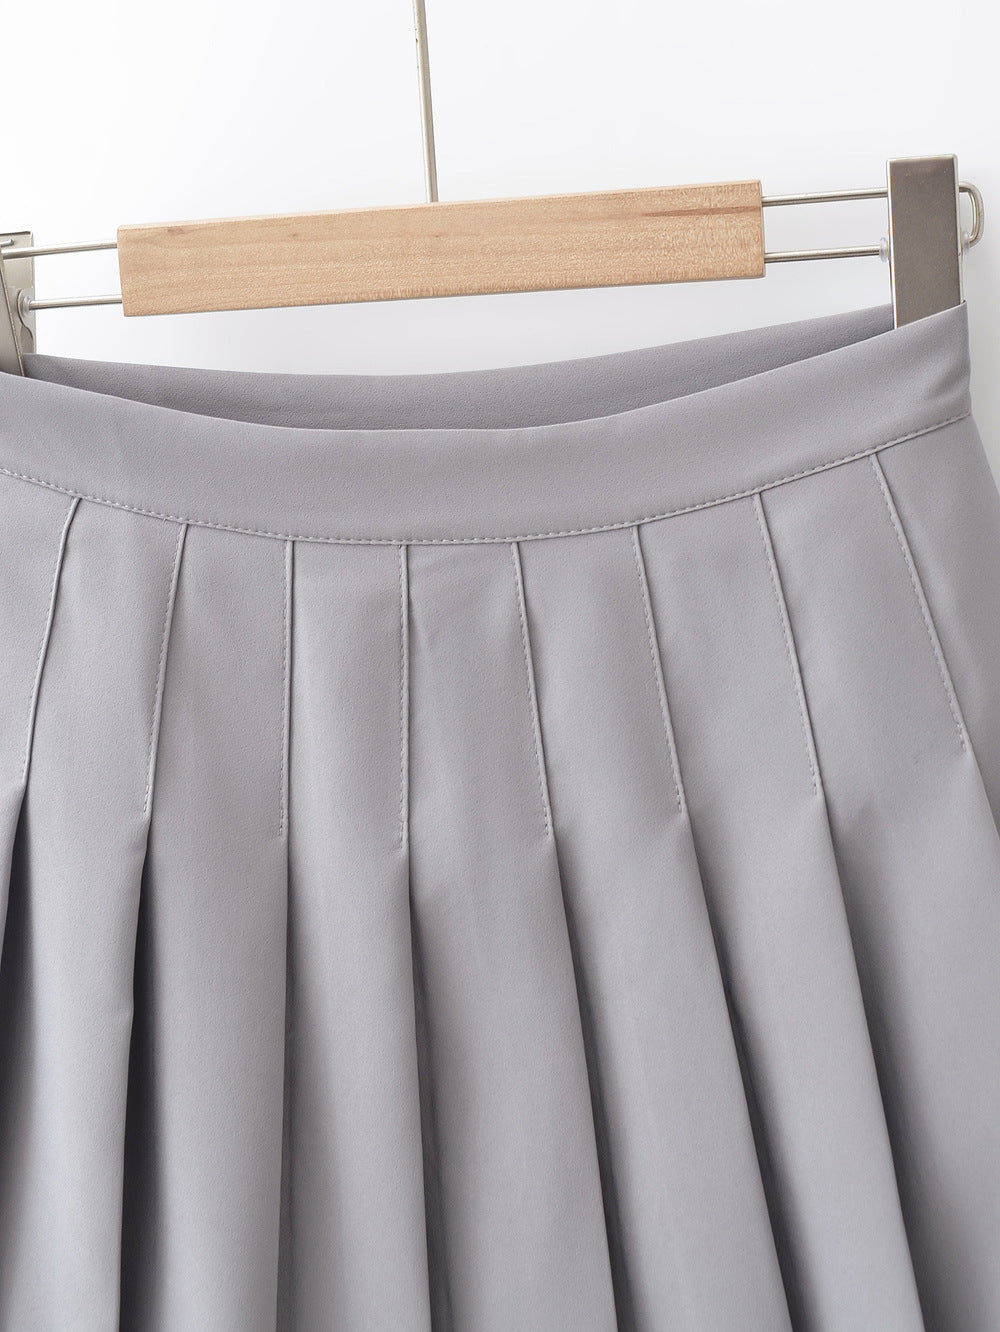 Hight Waist Solid Color Pleated Skirt